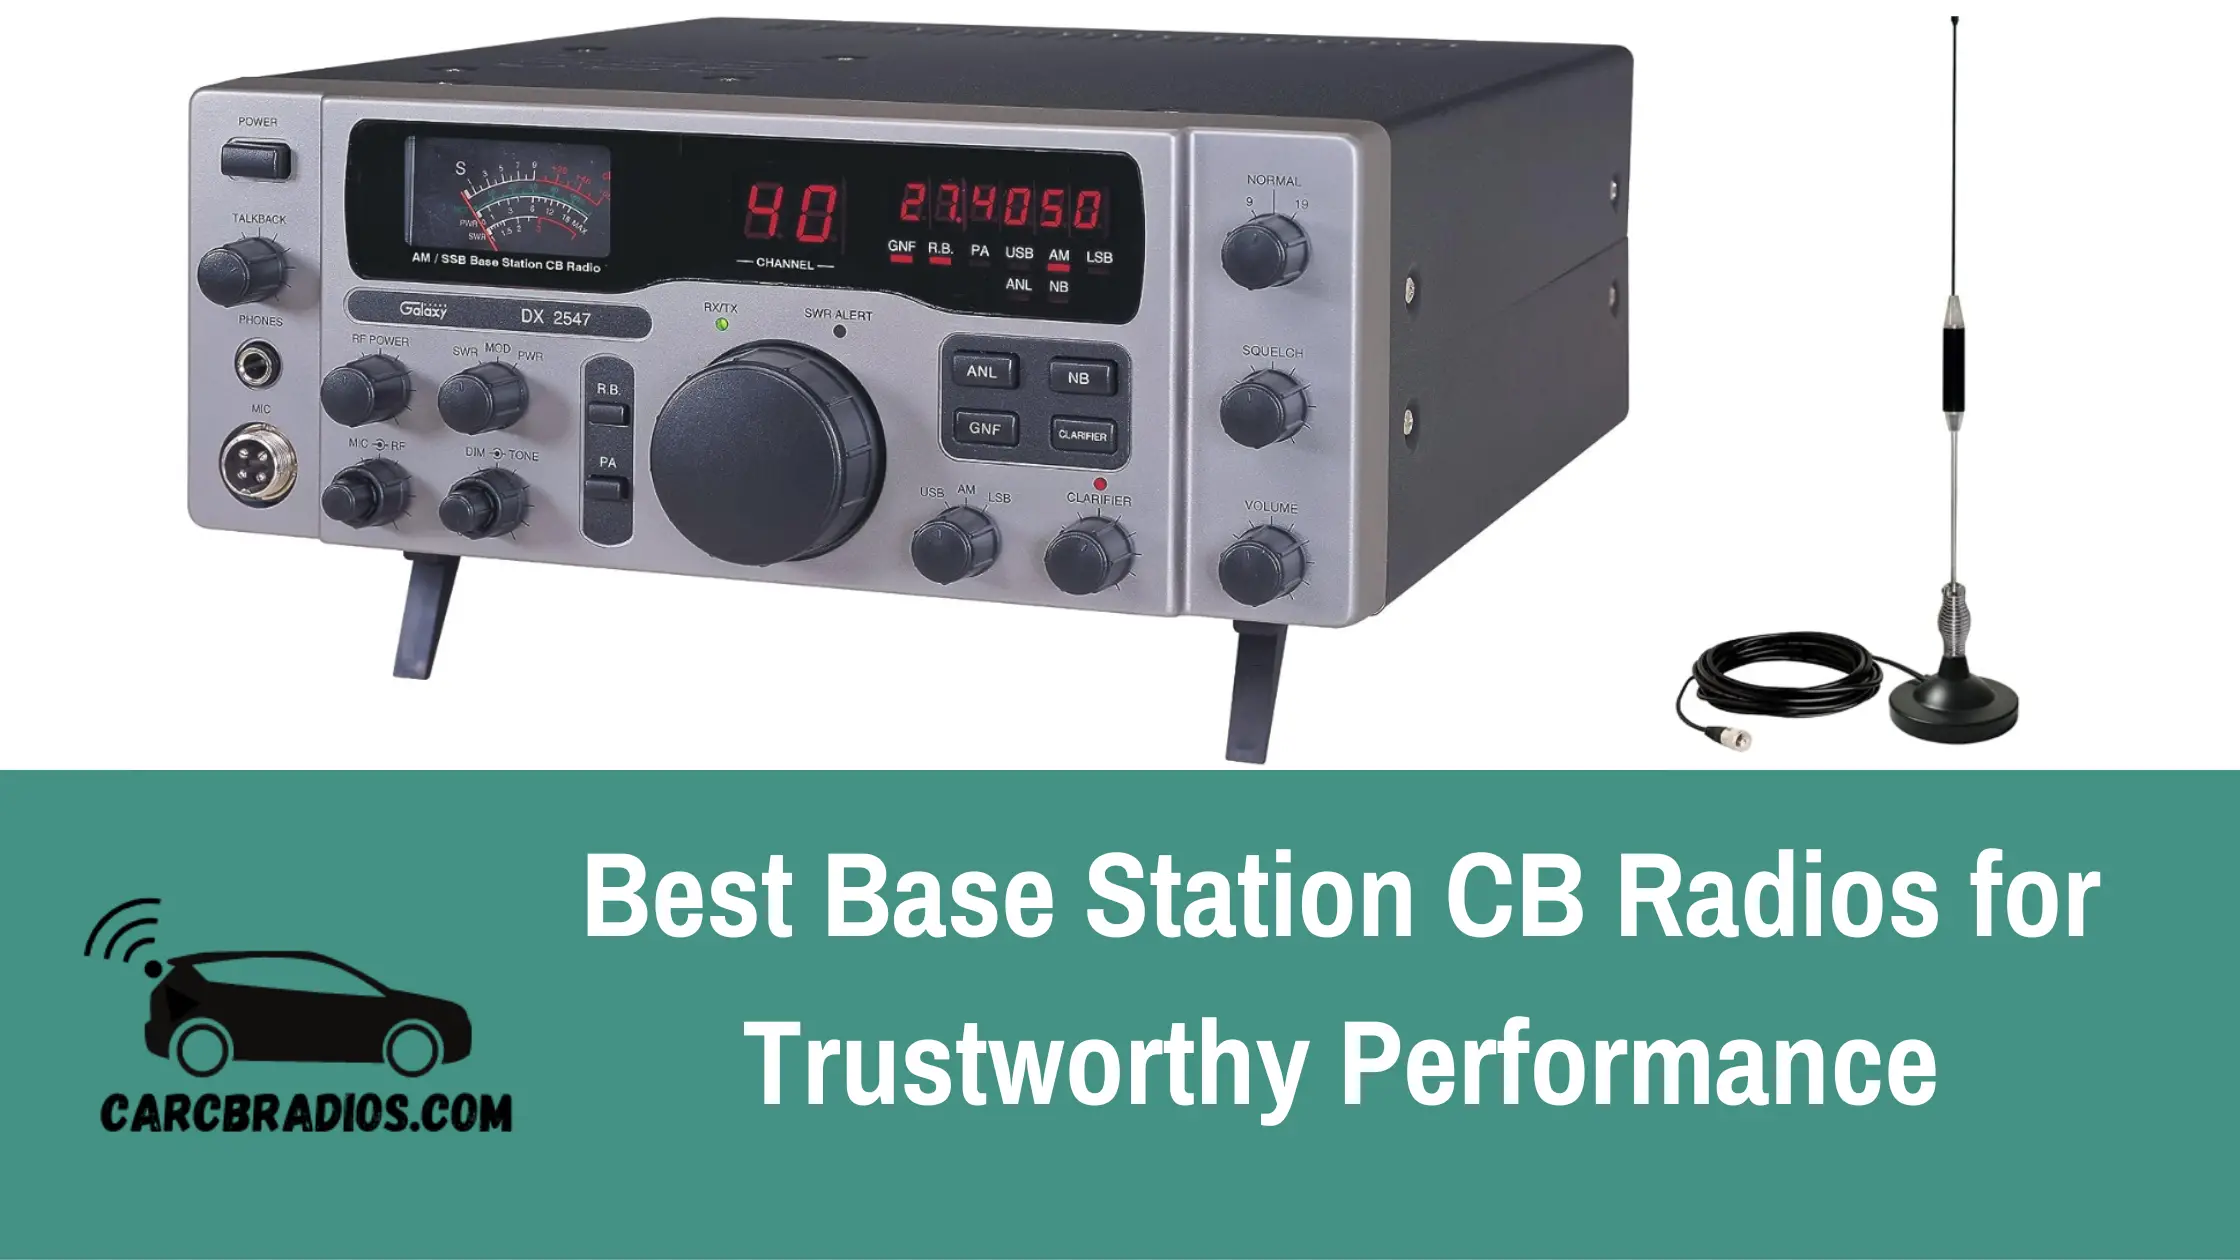 When it comes to choosing the best base station CB radio, there are a few critical things to consider. One of the most important factors is the power output, which determines how far your signal can reach. Another factor to consider is the antenna, which can significantly impact the clarity and strength of your signal.